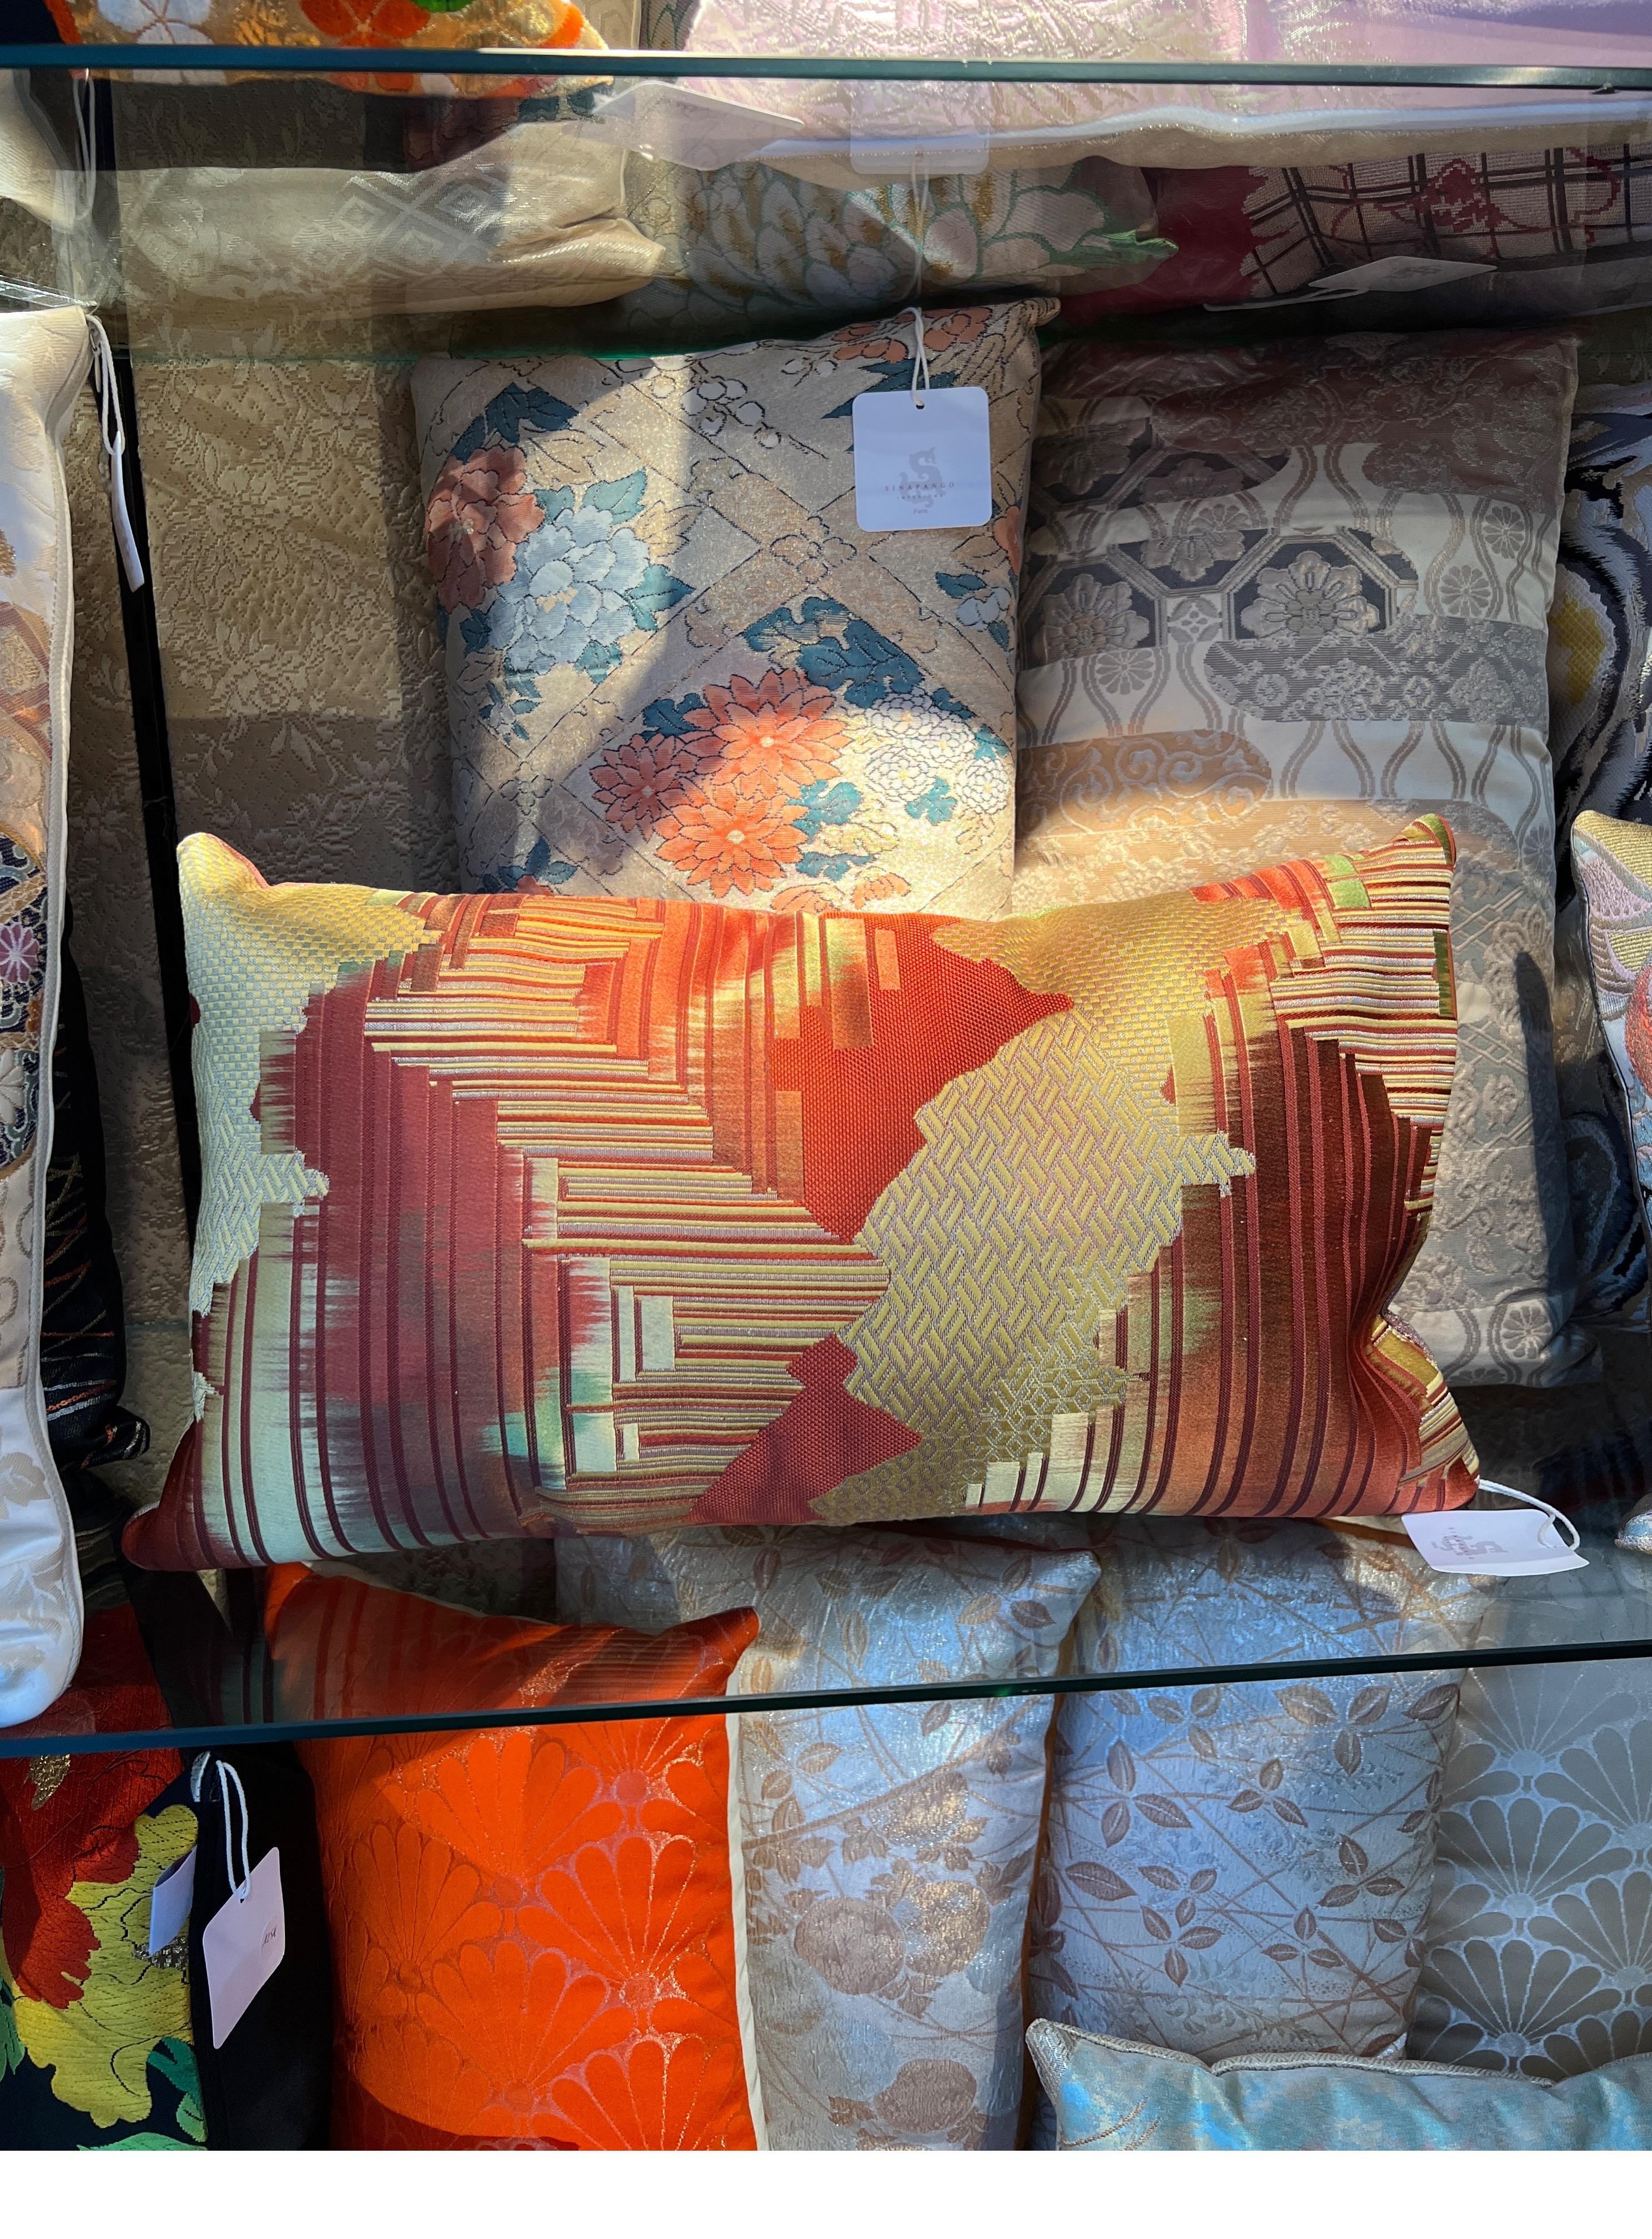 A spectacular lombar pillow wowen in silk and metal threads.

Buying handmade cushions from Sinapango Interiors Paris, crafted from vintage Obi silk made in Nishijin district in Kyoto Japan not only adds an elegant touch but also brings a unique